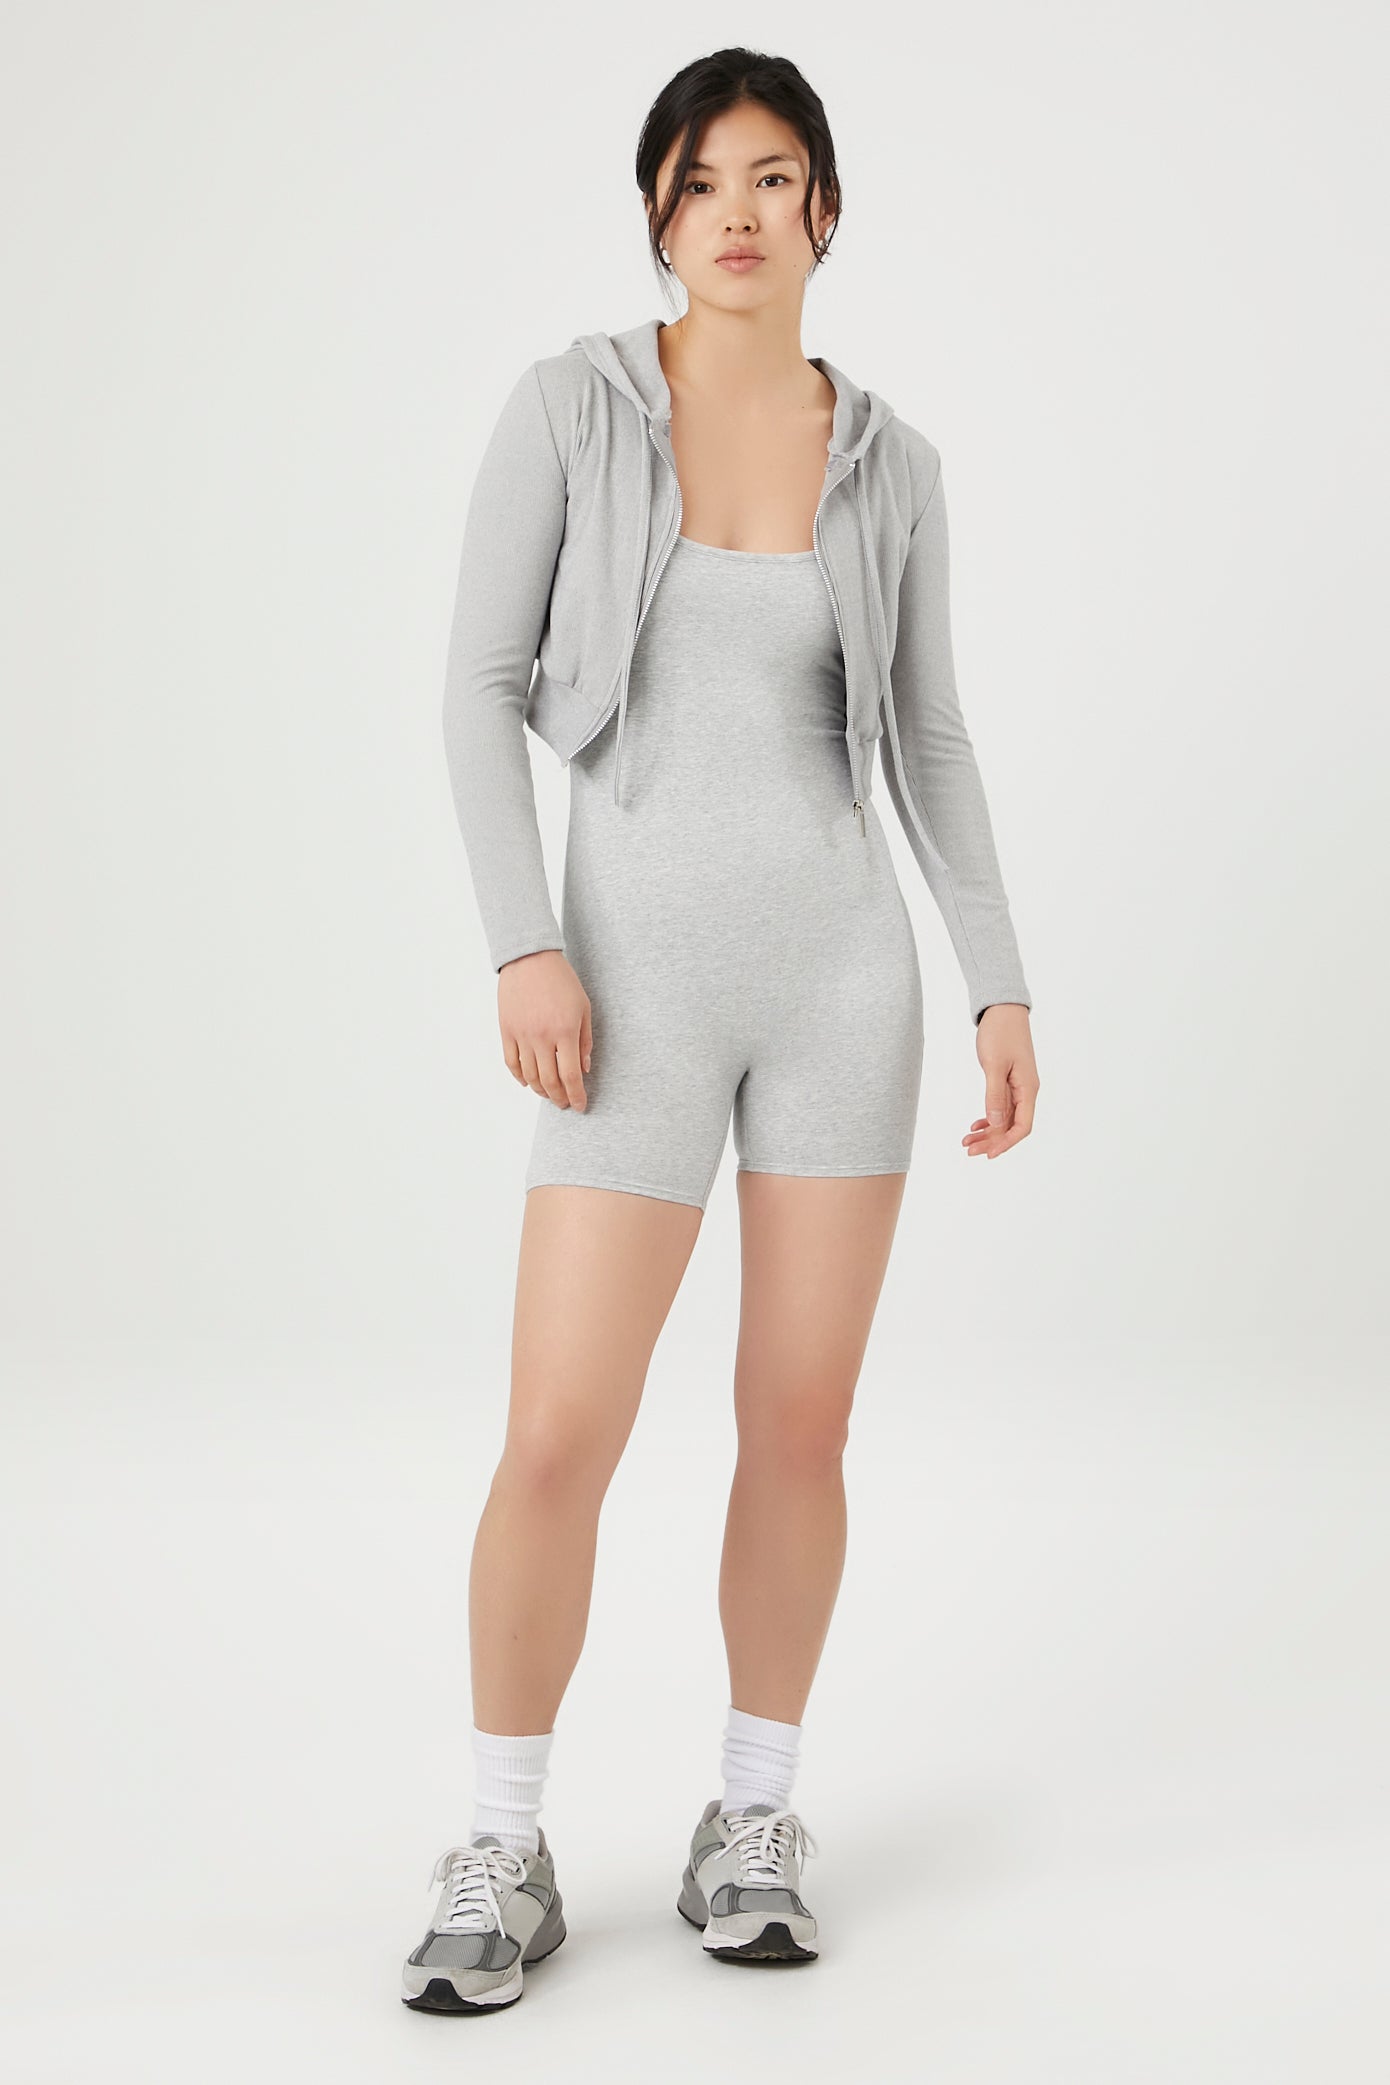 Heather Grey Fitted Scoop-Neck Romper 9